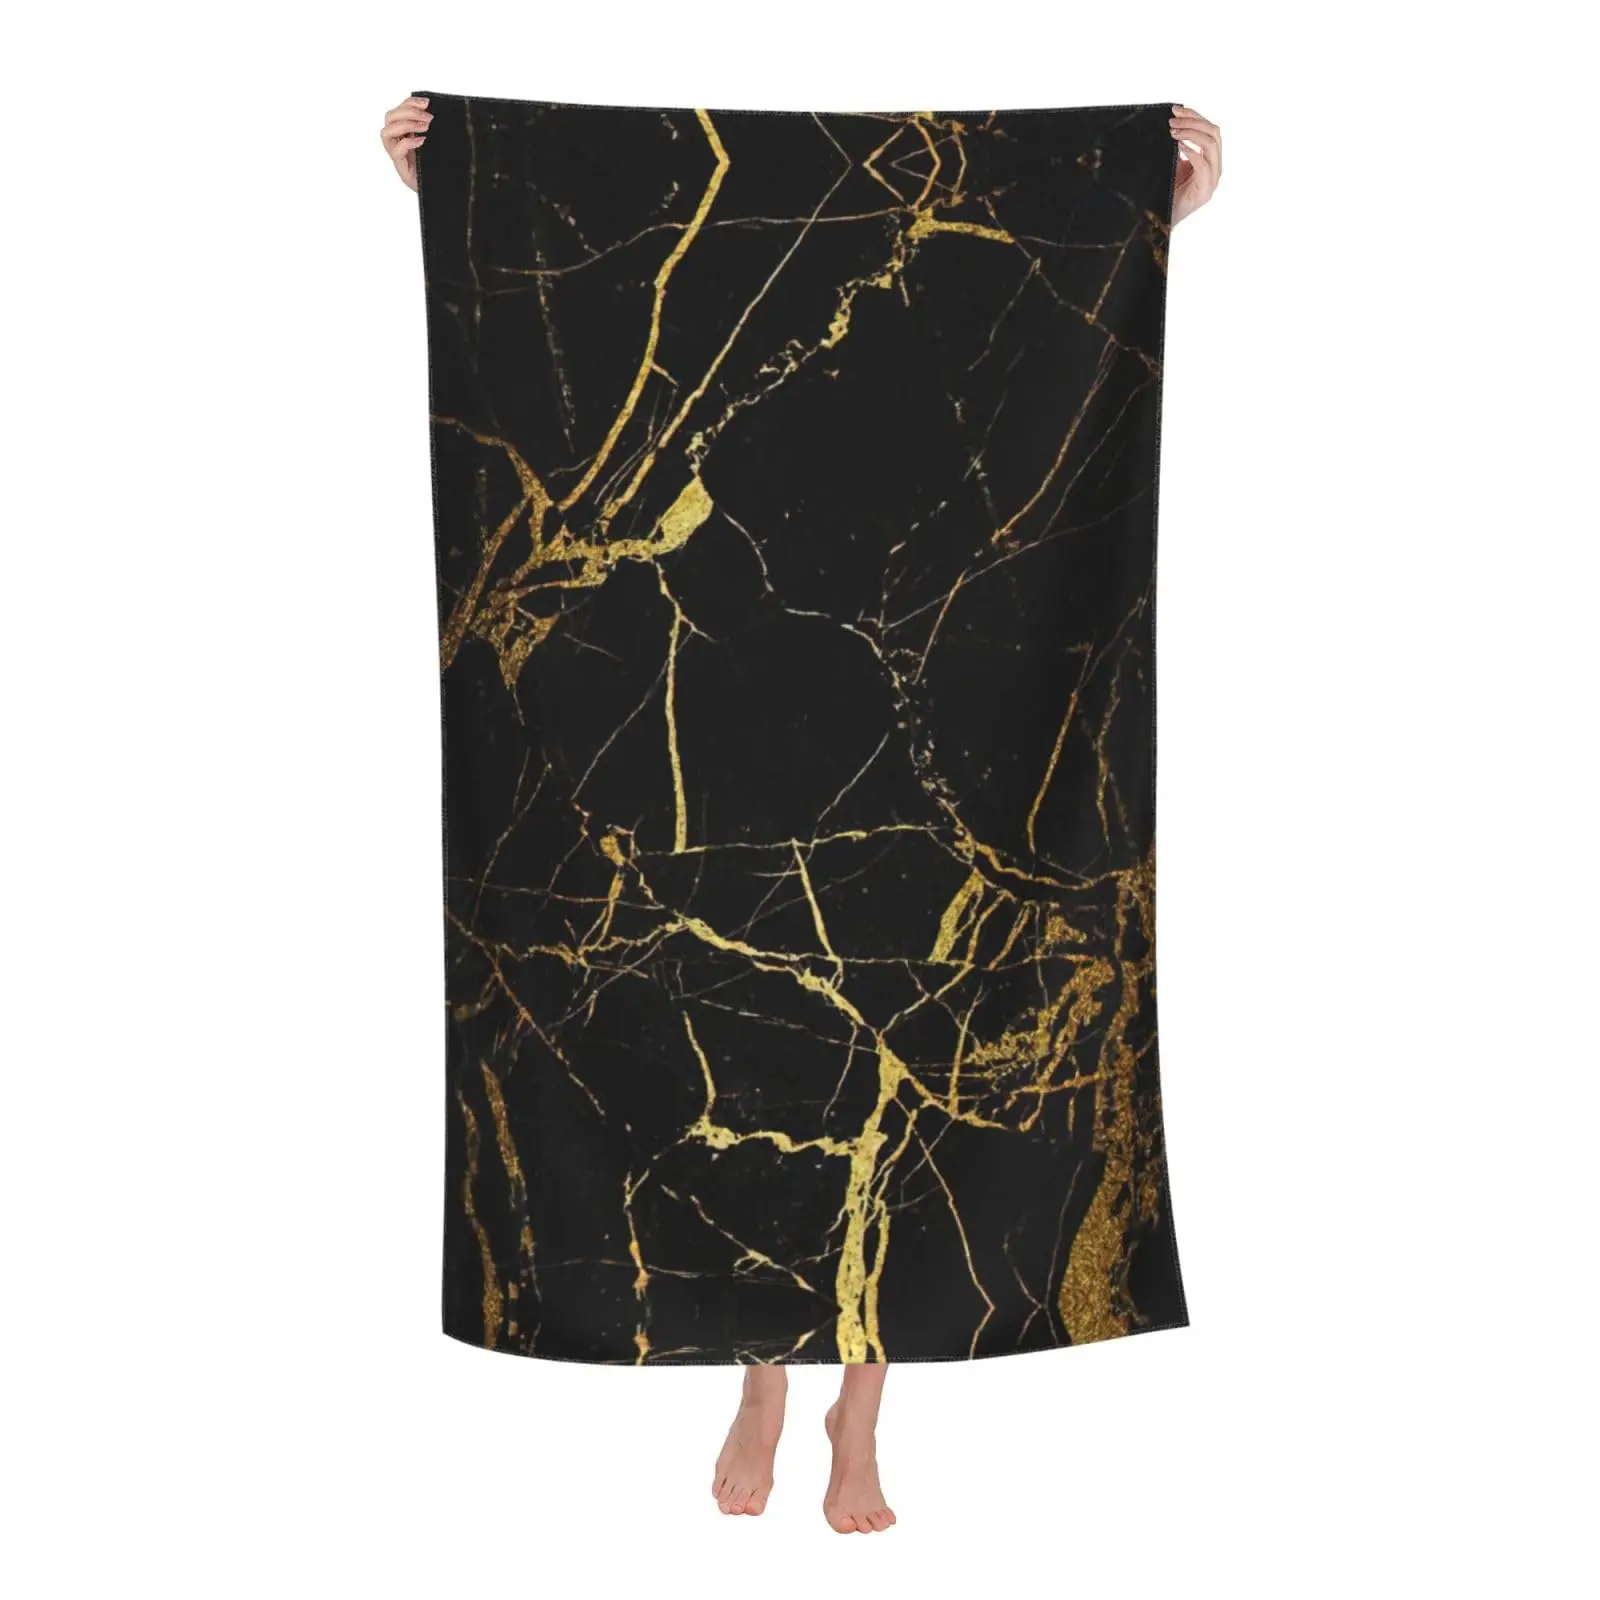 

Abstract Black Marble Beach Towel with Gold Gray Texture Absorbent Soft Free Sand Lightweight Bath Towel for Kids Adult